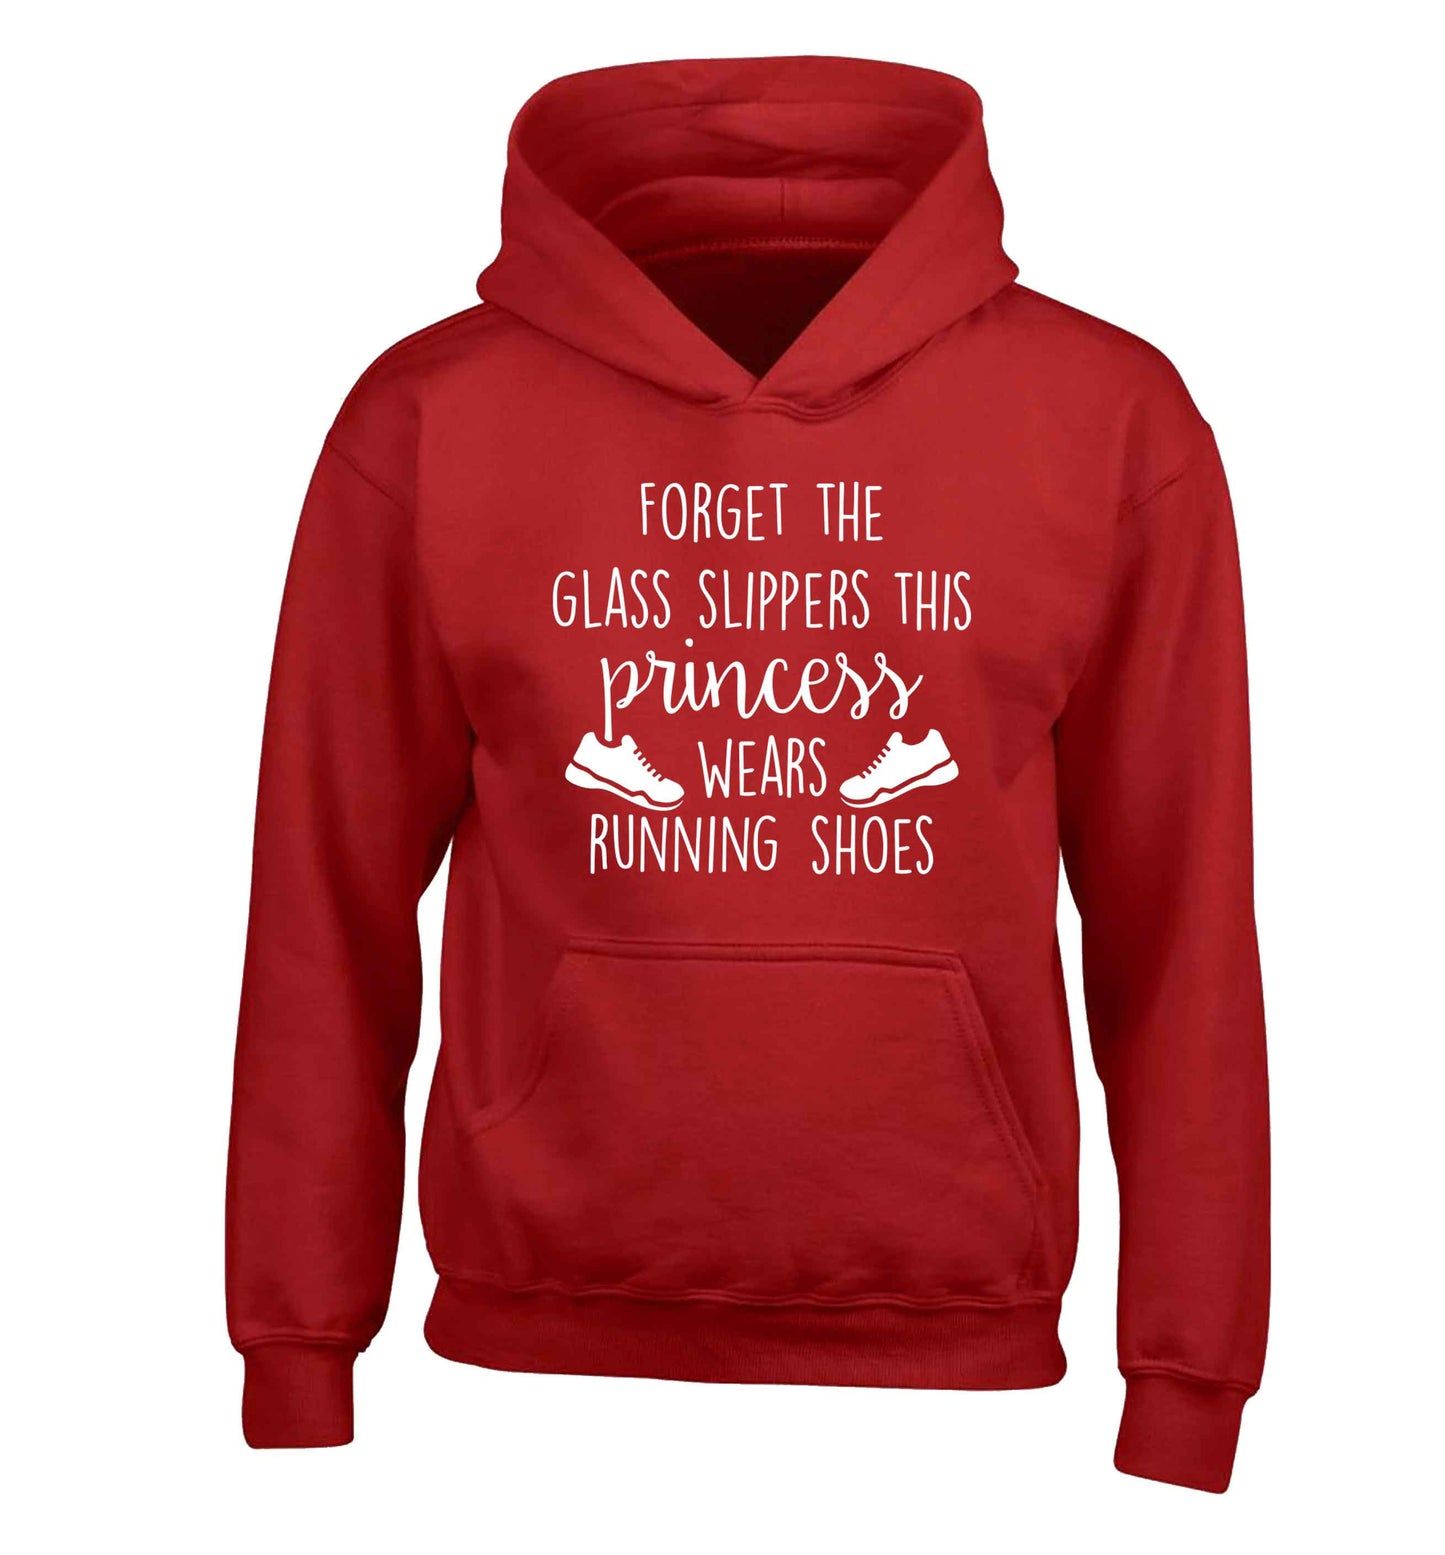 Forget the glass slippers this princess wears running shoes children's red hoodie 12-13 Years